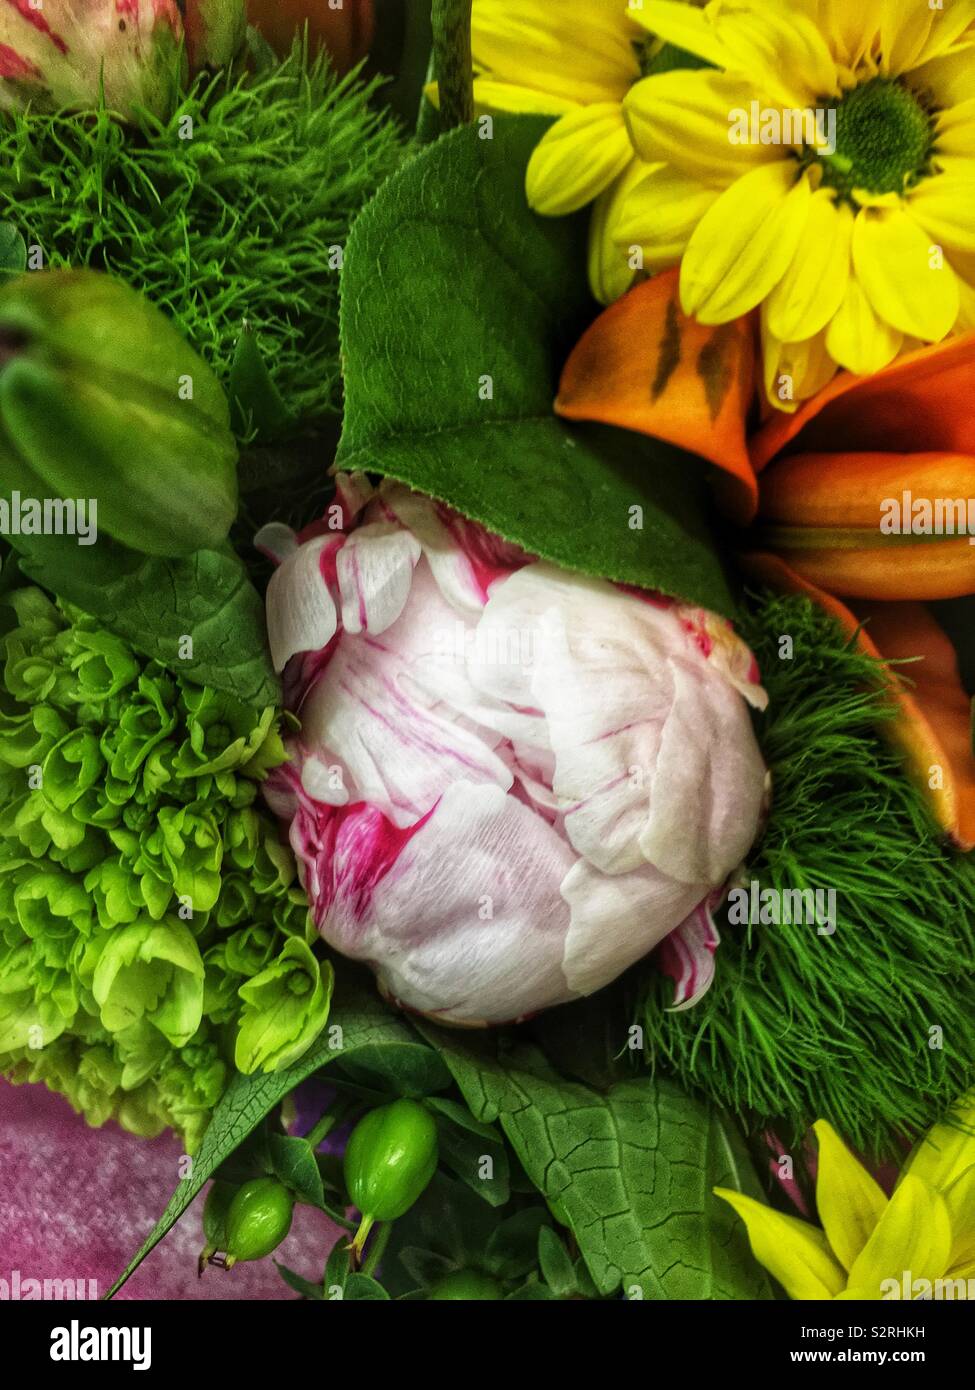 Fragrant bouquet of colorful summer blossoms including a budding pink peony flower. Stock Photo